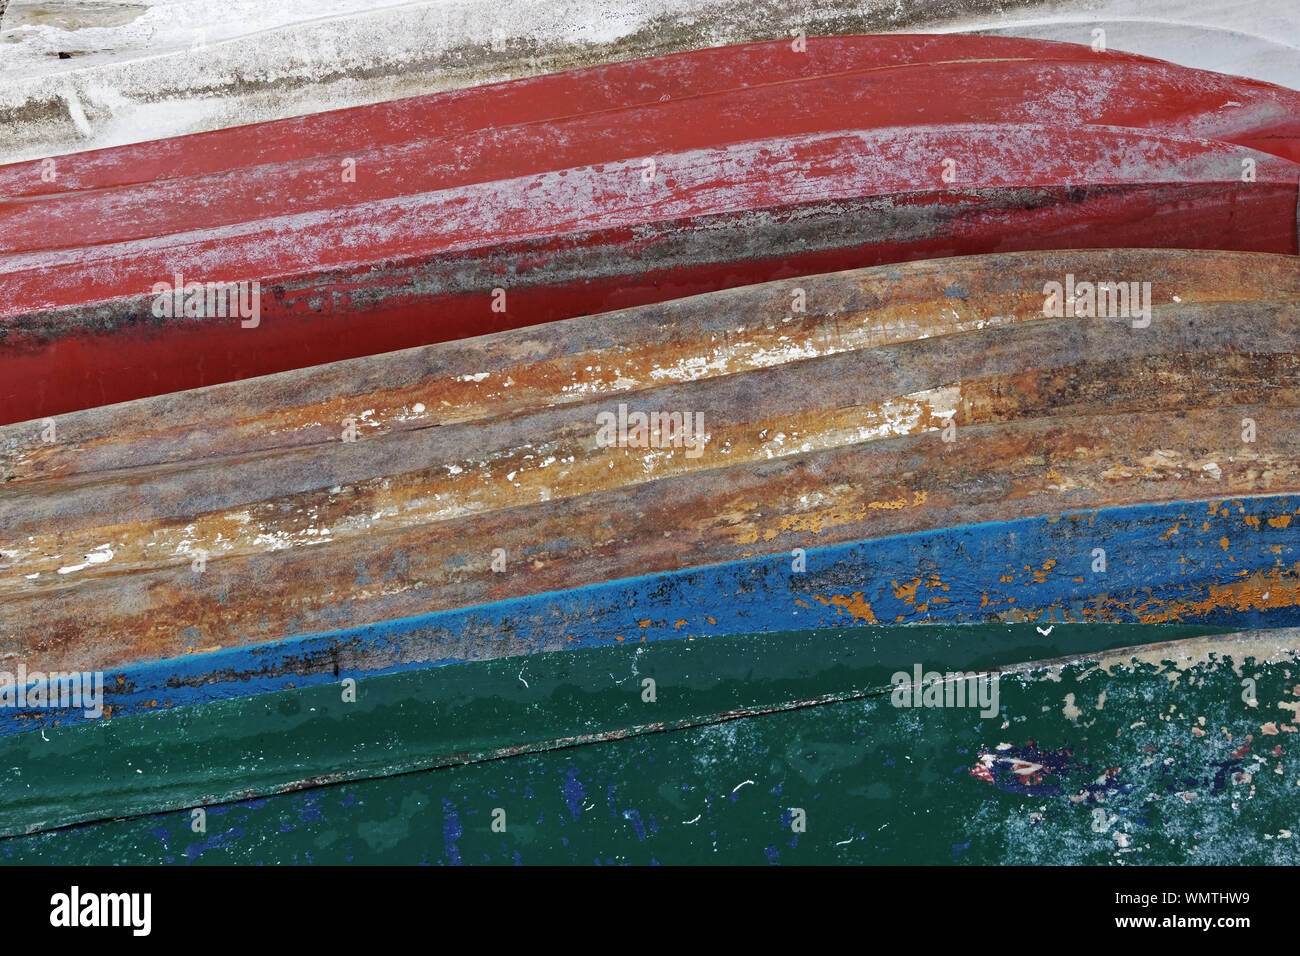 peeling paint of old boats, keels form an abstract pattern Stock Photo